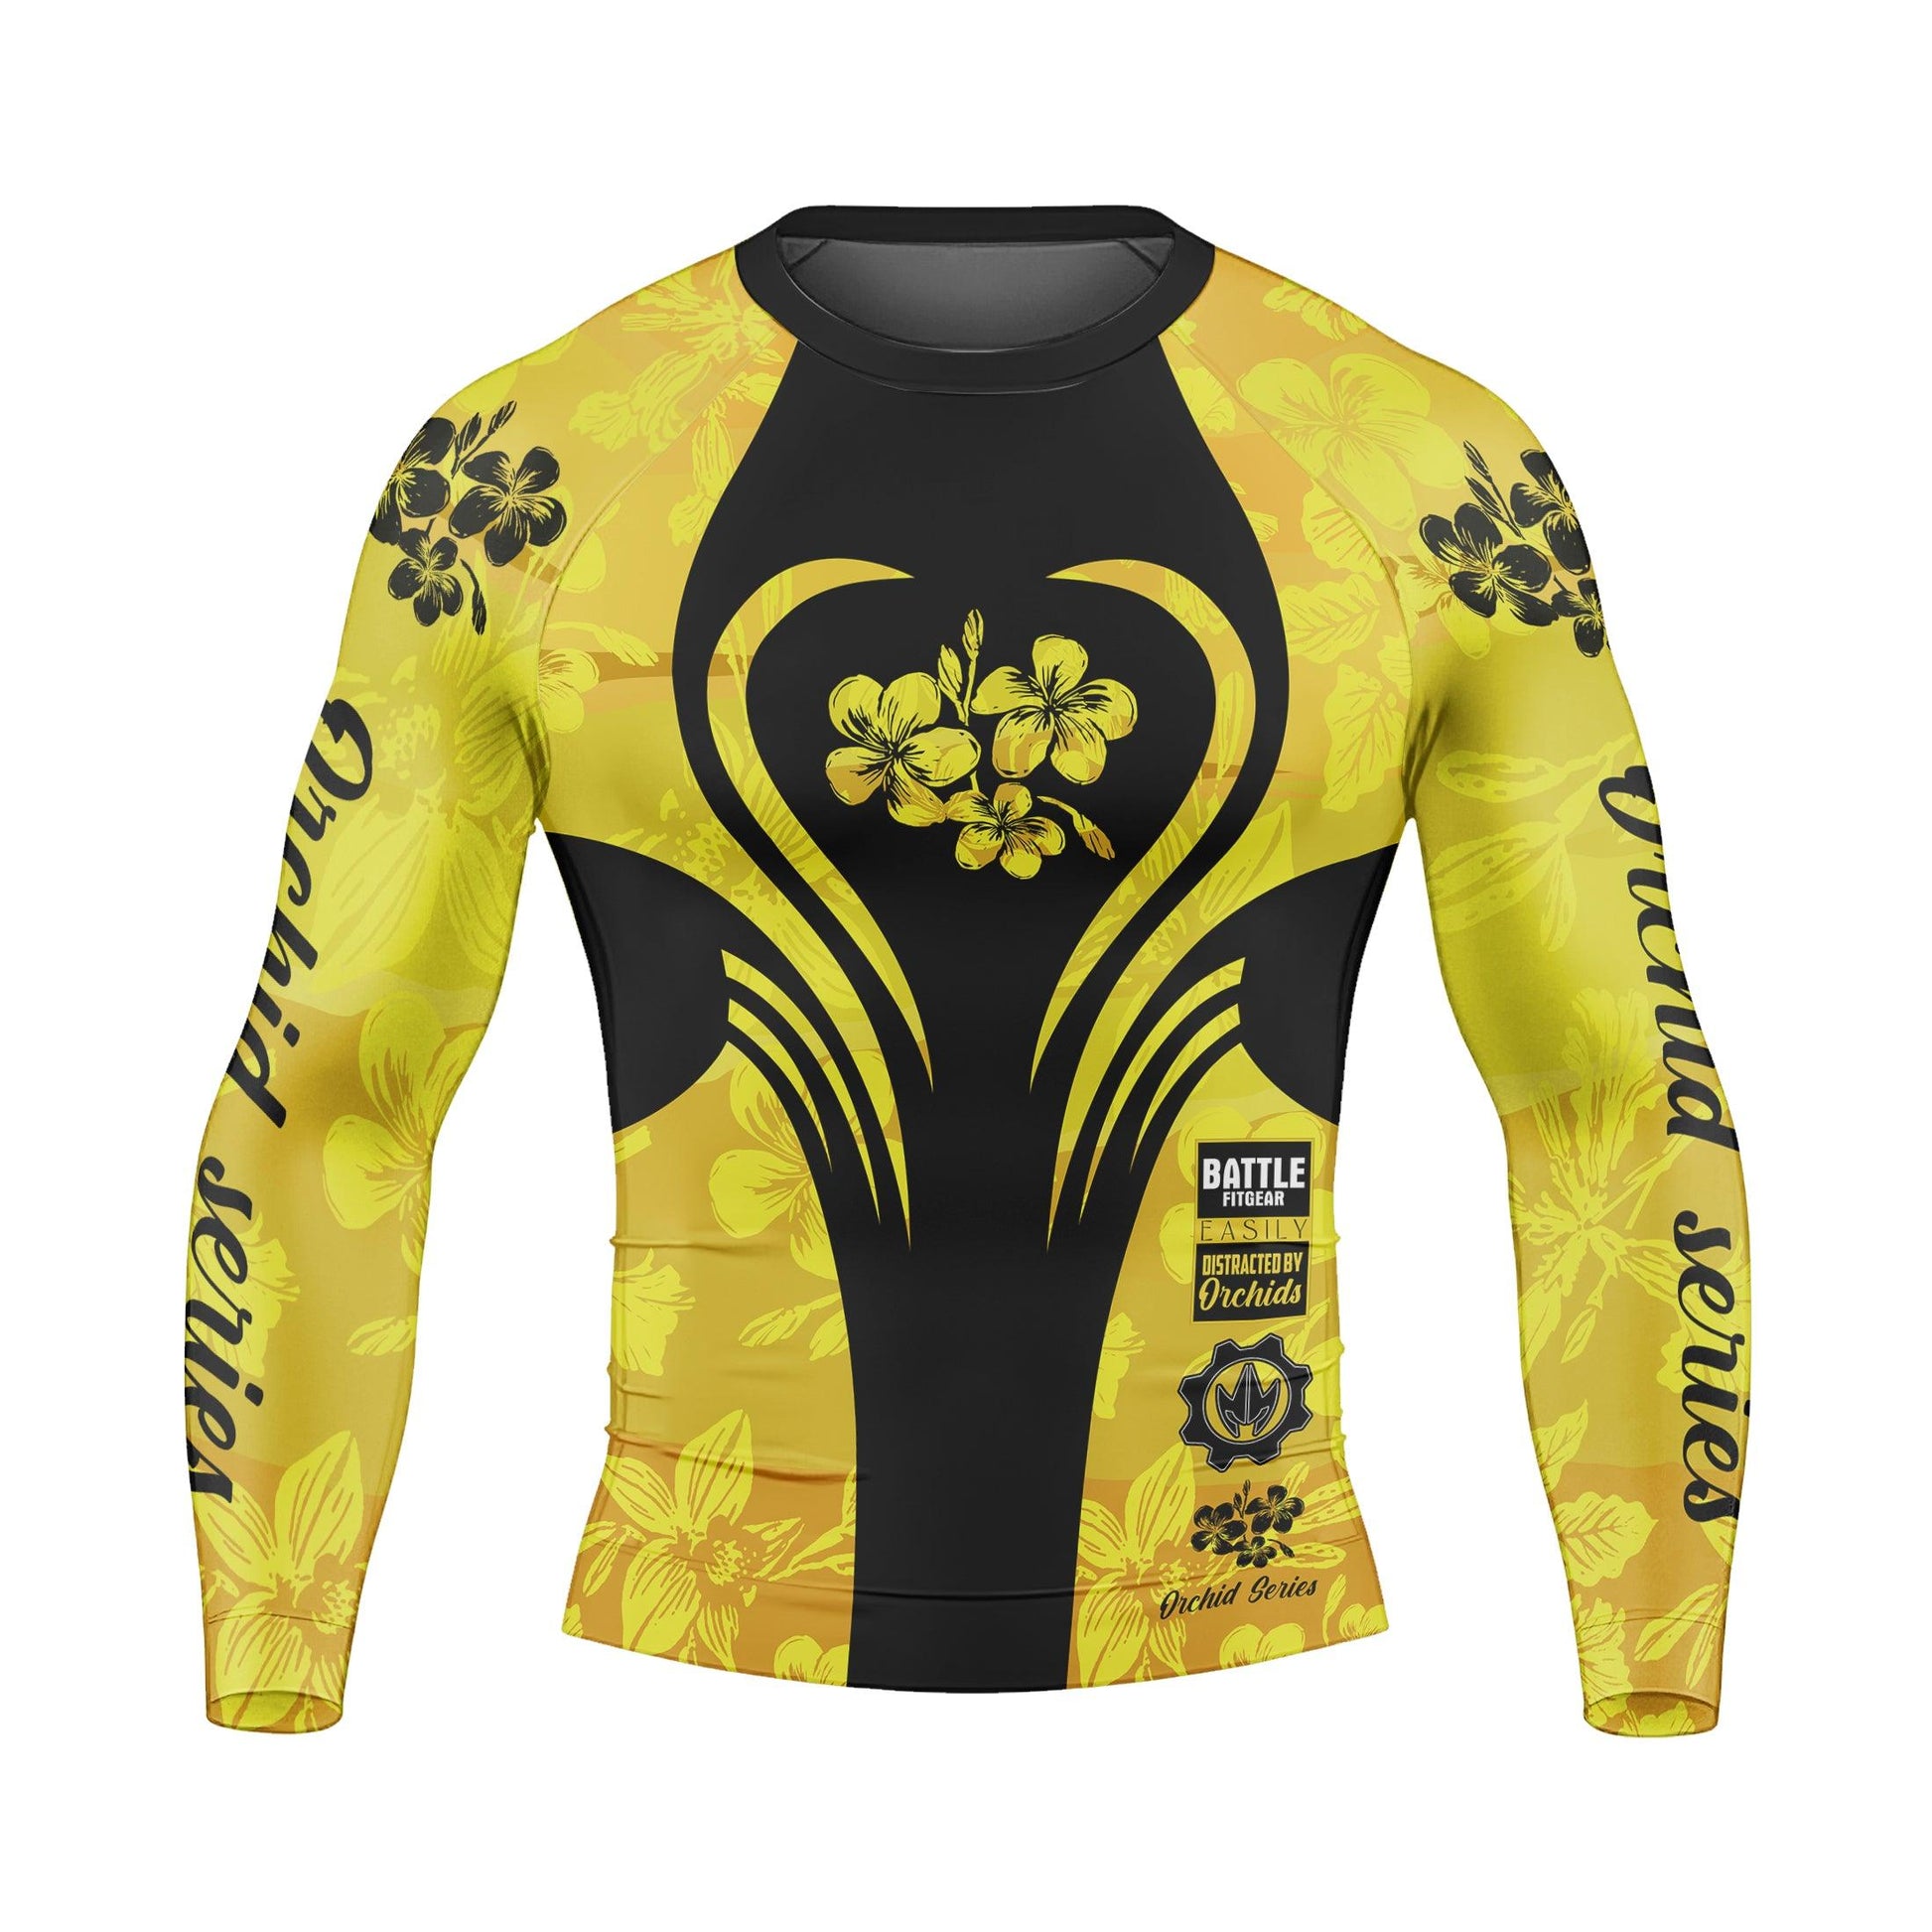 Orchid Series Floral Yellow Heart Pattern Men's Long Sleeve Rash Guard